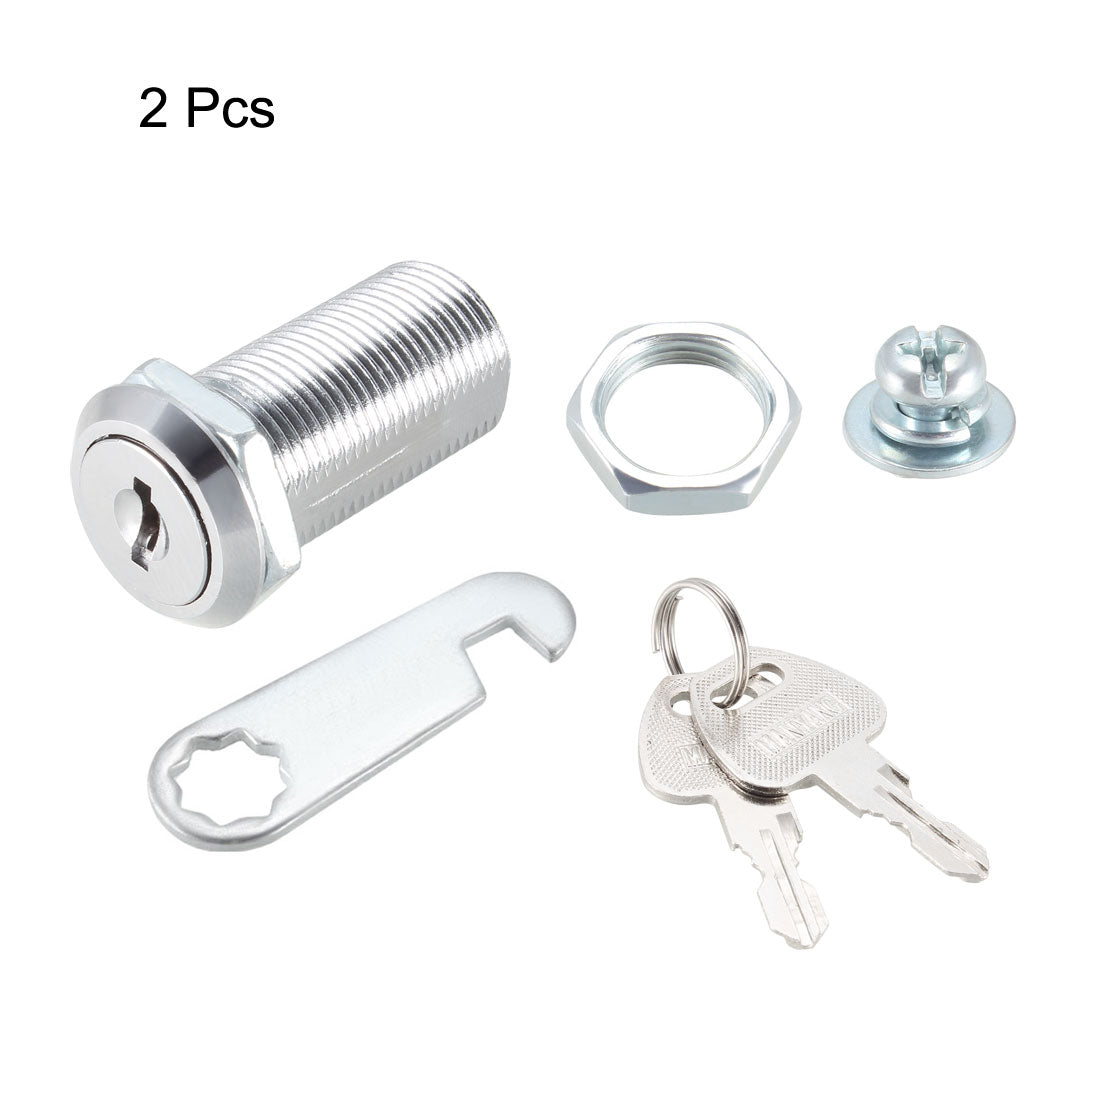 uxcell Uxcell Cam Locks 35mm Cylinder Length Fit Max 30mm Panel Keyed Different 2Pcs